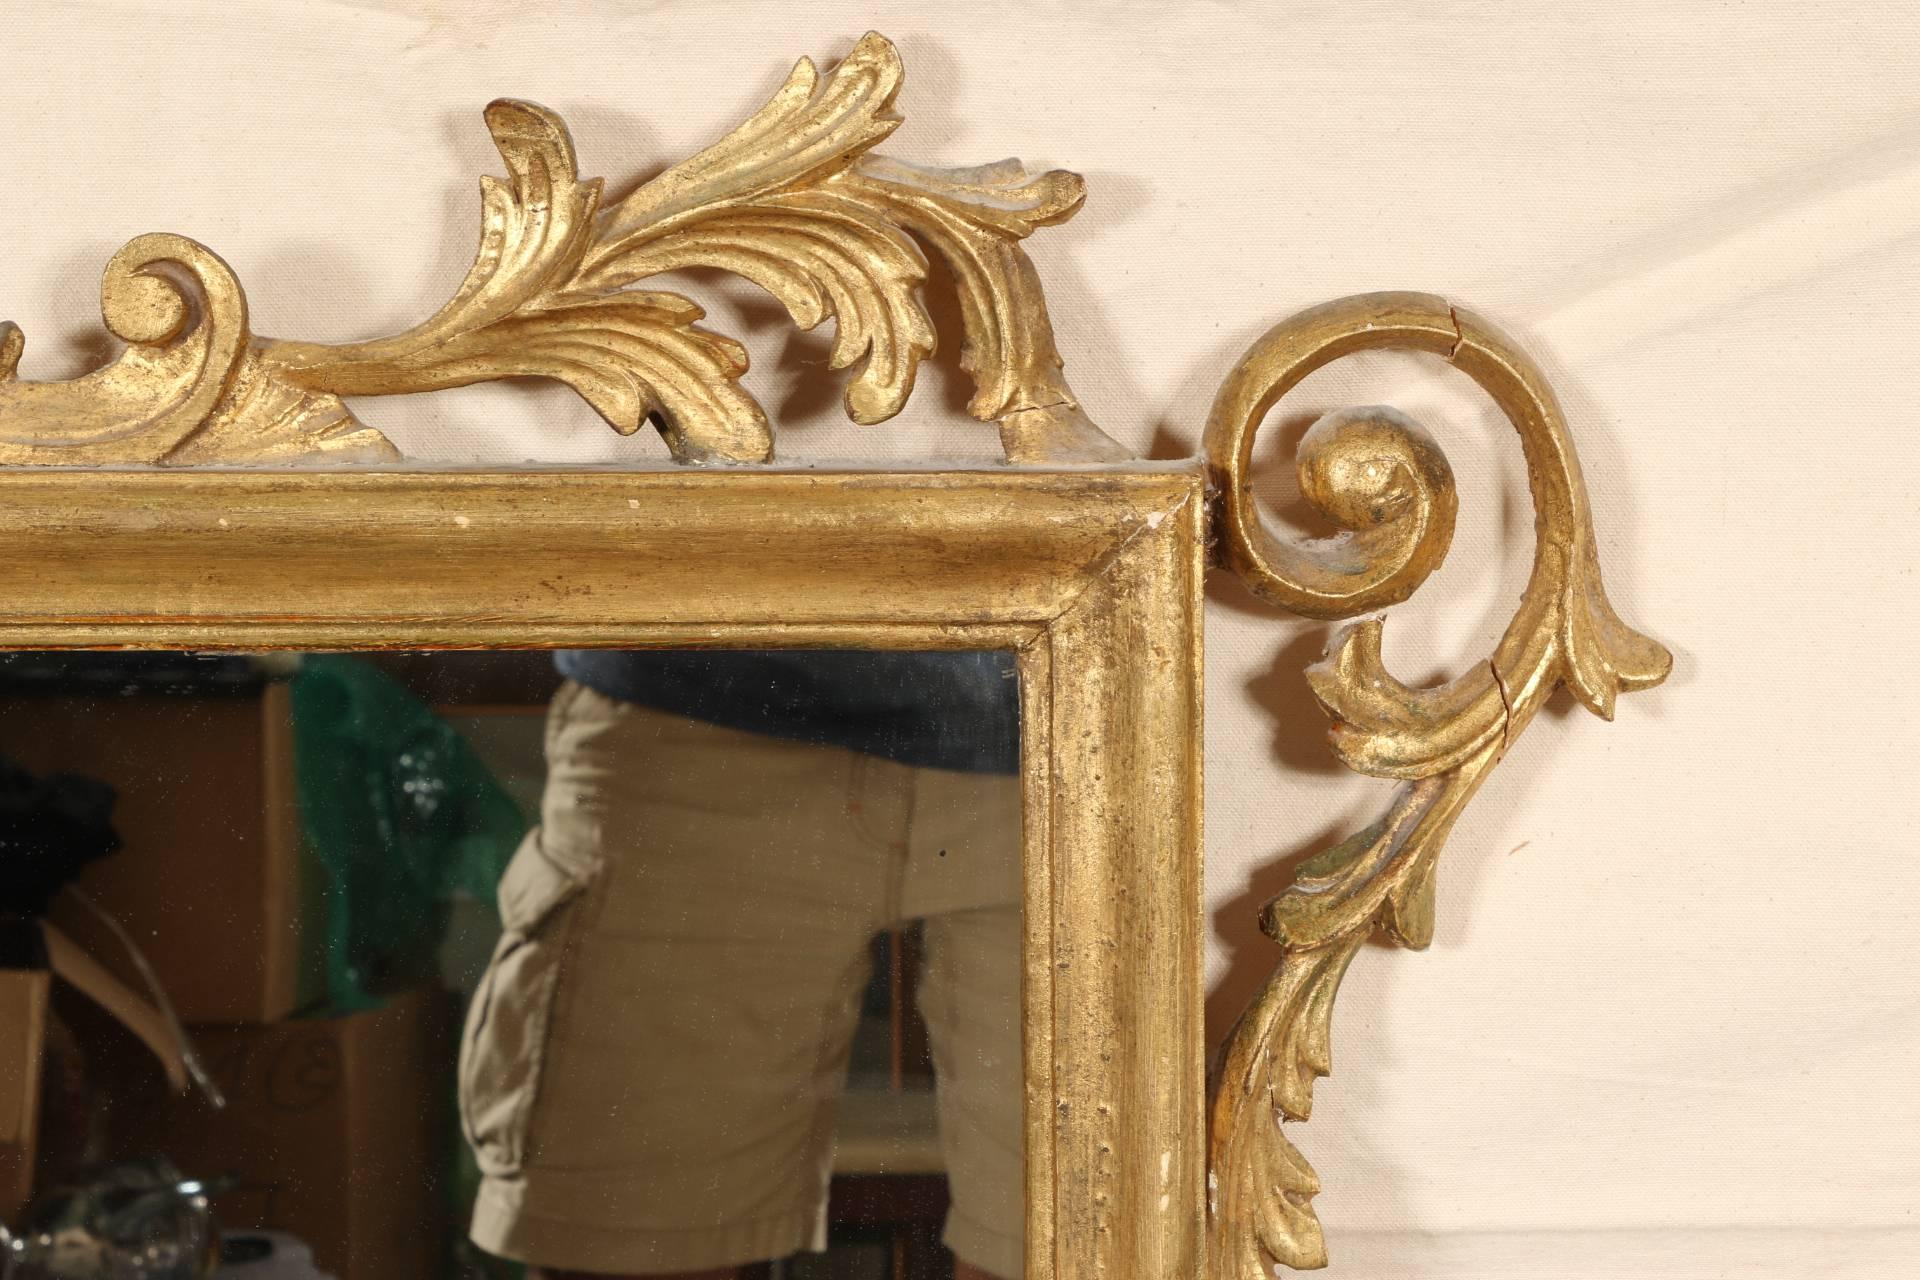 The surround with elaborate openwork acanthus scrolls, a leafy urn finial, and leafy terminal. The slight darkening to the gilt in places makes for a fine vintage finish. 
Condition: chip to top center right leaf point, chip to top left acanthus